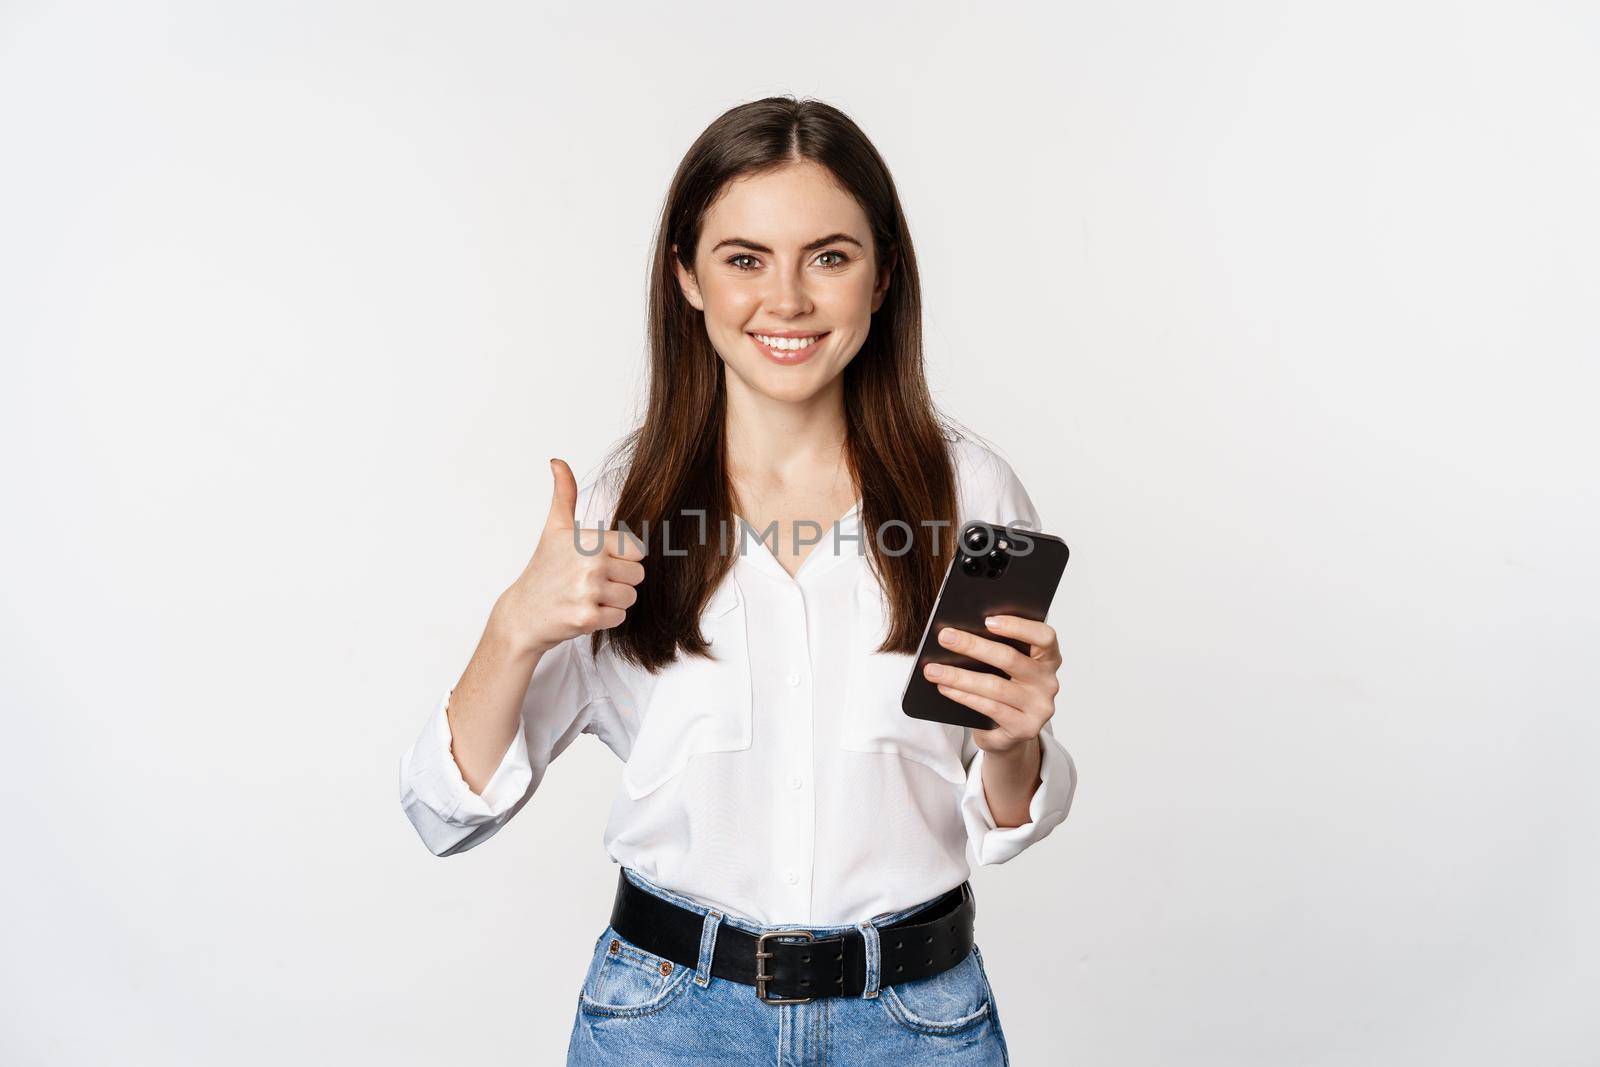 Happy smiling corporate woman, female model showing thumb up, holding smartphone, using cellphone, standing over white background.